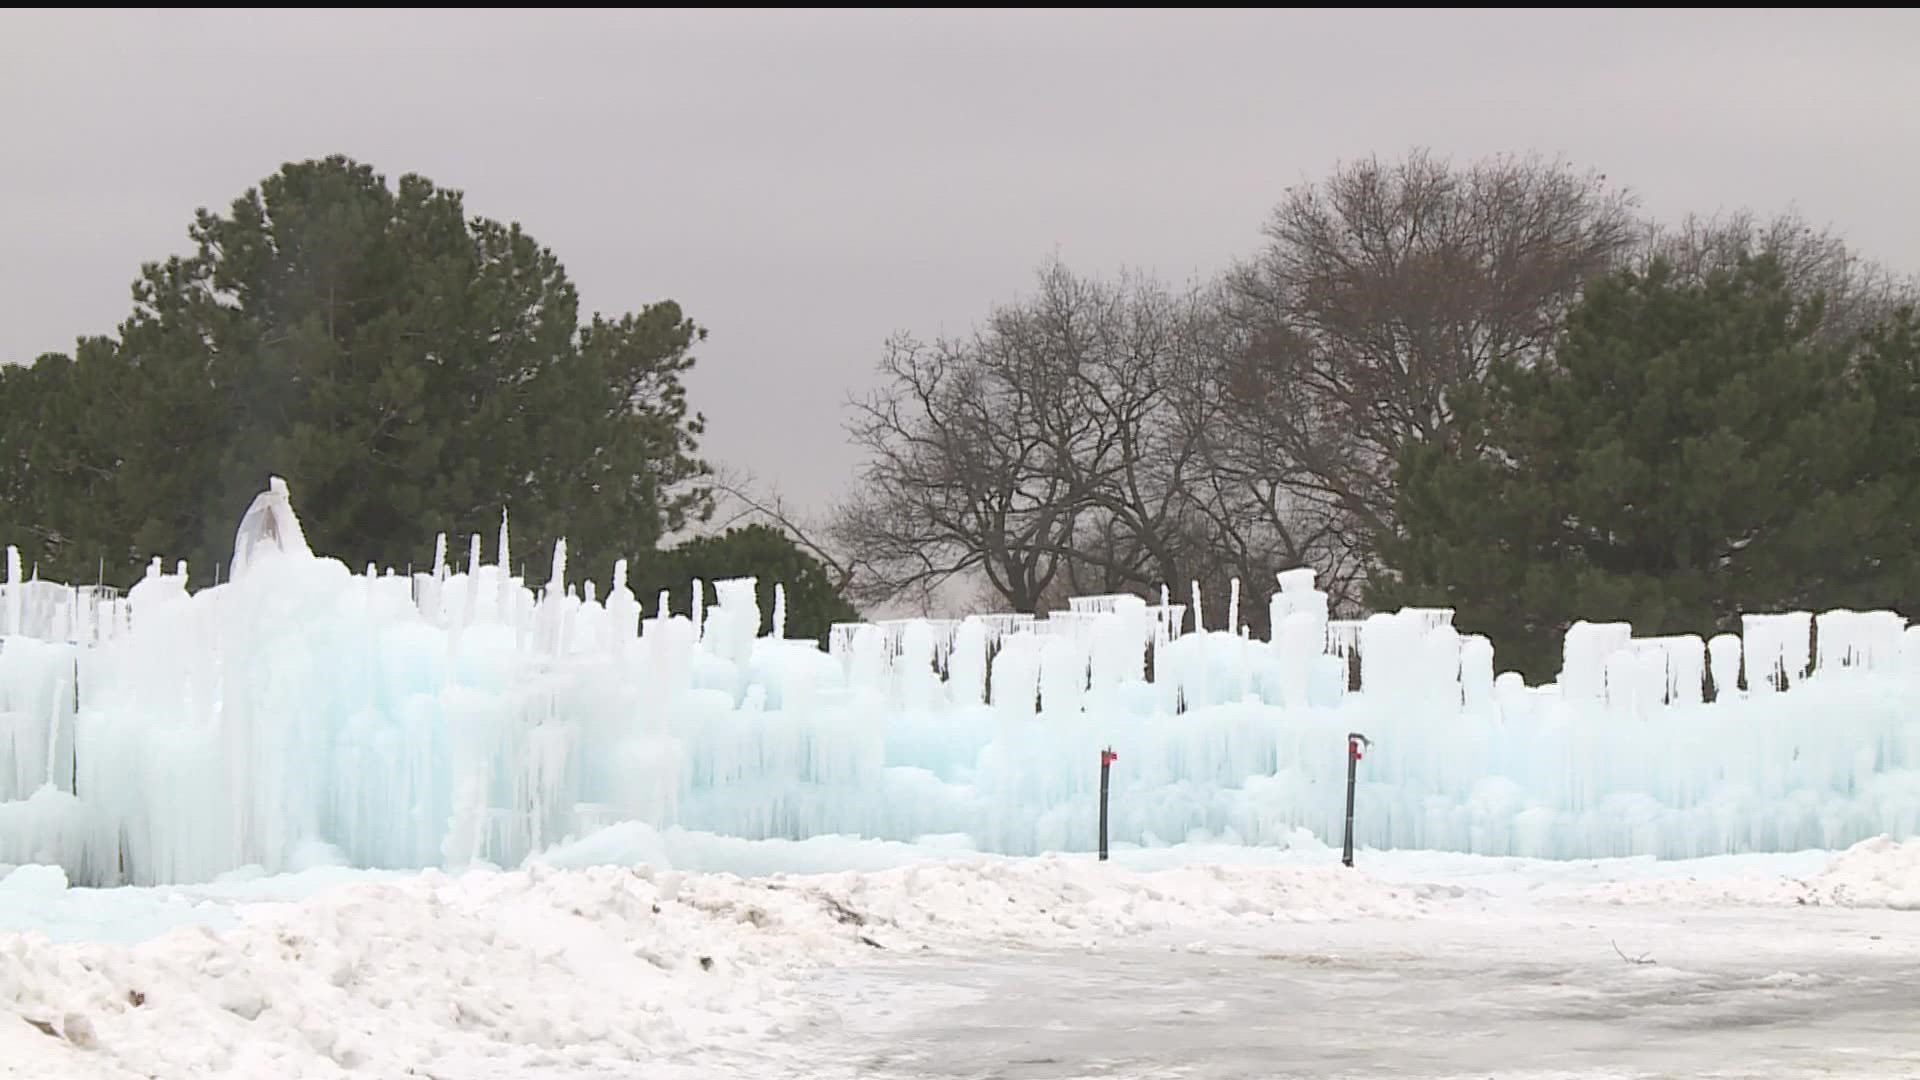 At the Ice Castles in New Brighton, workers are preparing to lose as much as 50% of their ice this week.